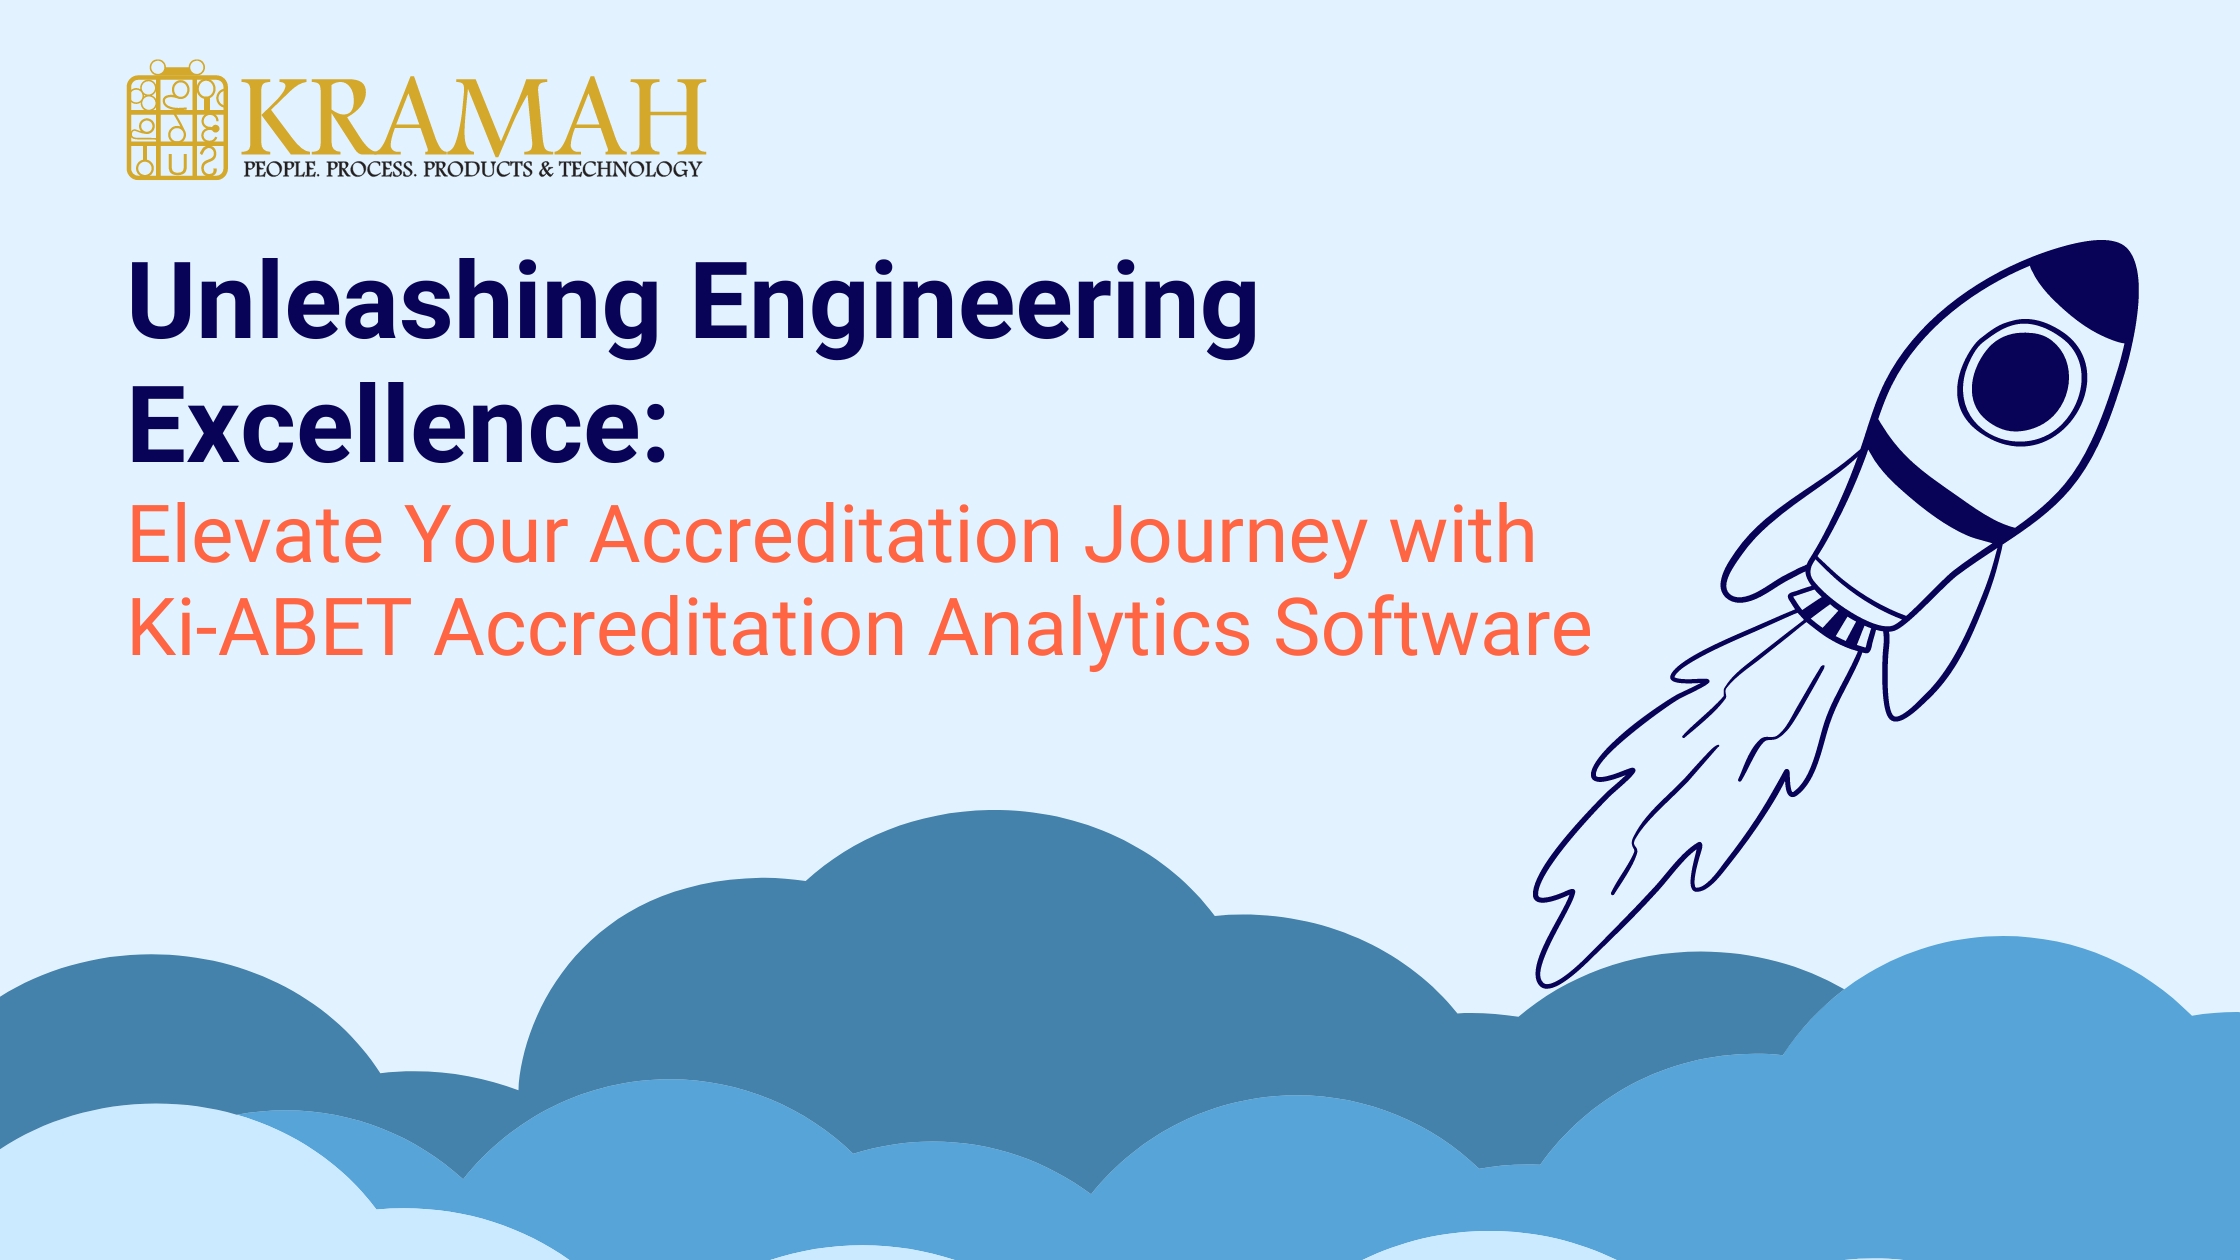 Unlock Engineering Excellence: Optimize Your Accreditation Journey with Ki-ABET Software